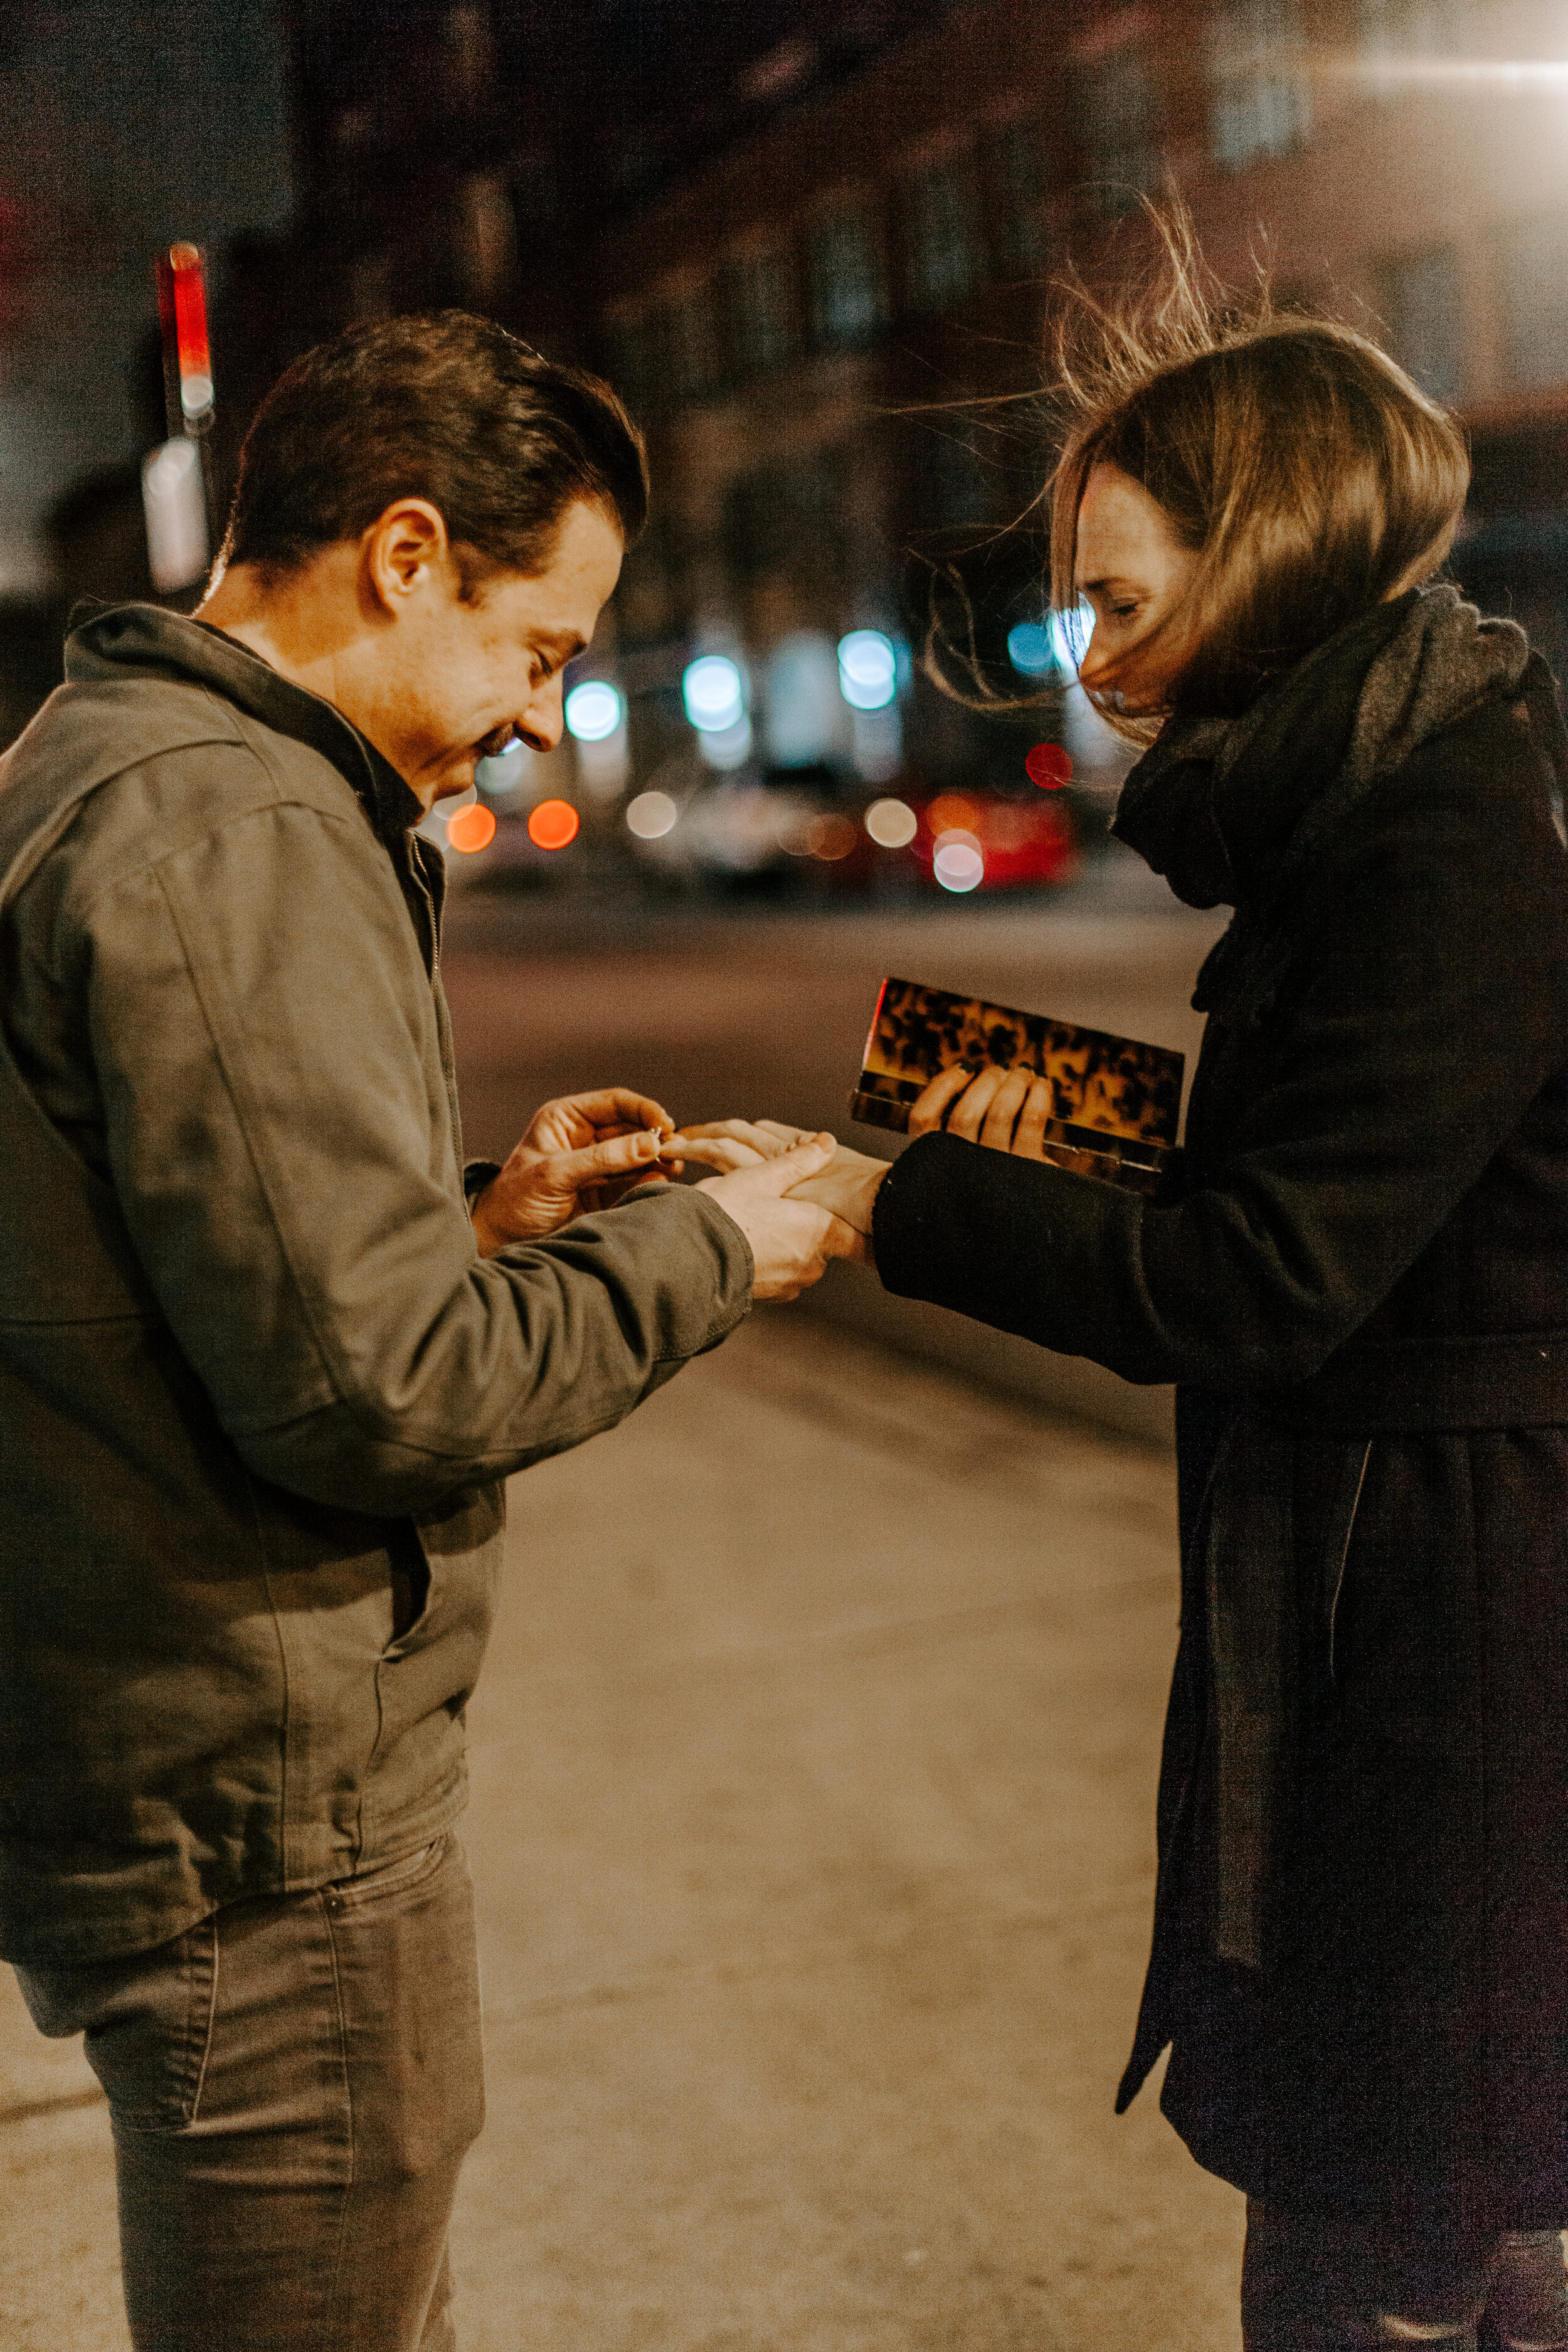  Chicago surprise proposal, man puts engagement ring on his new fiance’s finger as she reacts emotionally and happily. Chicago engagement photographer, Lucy B. Photography 